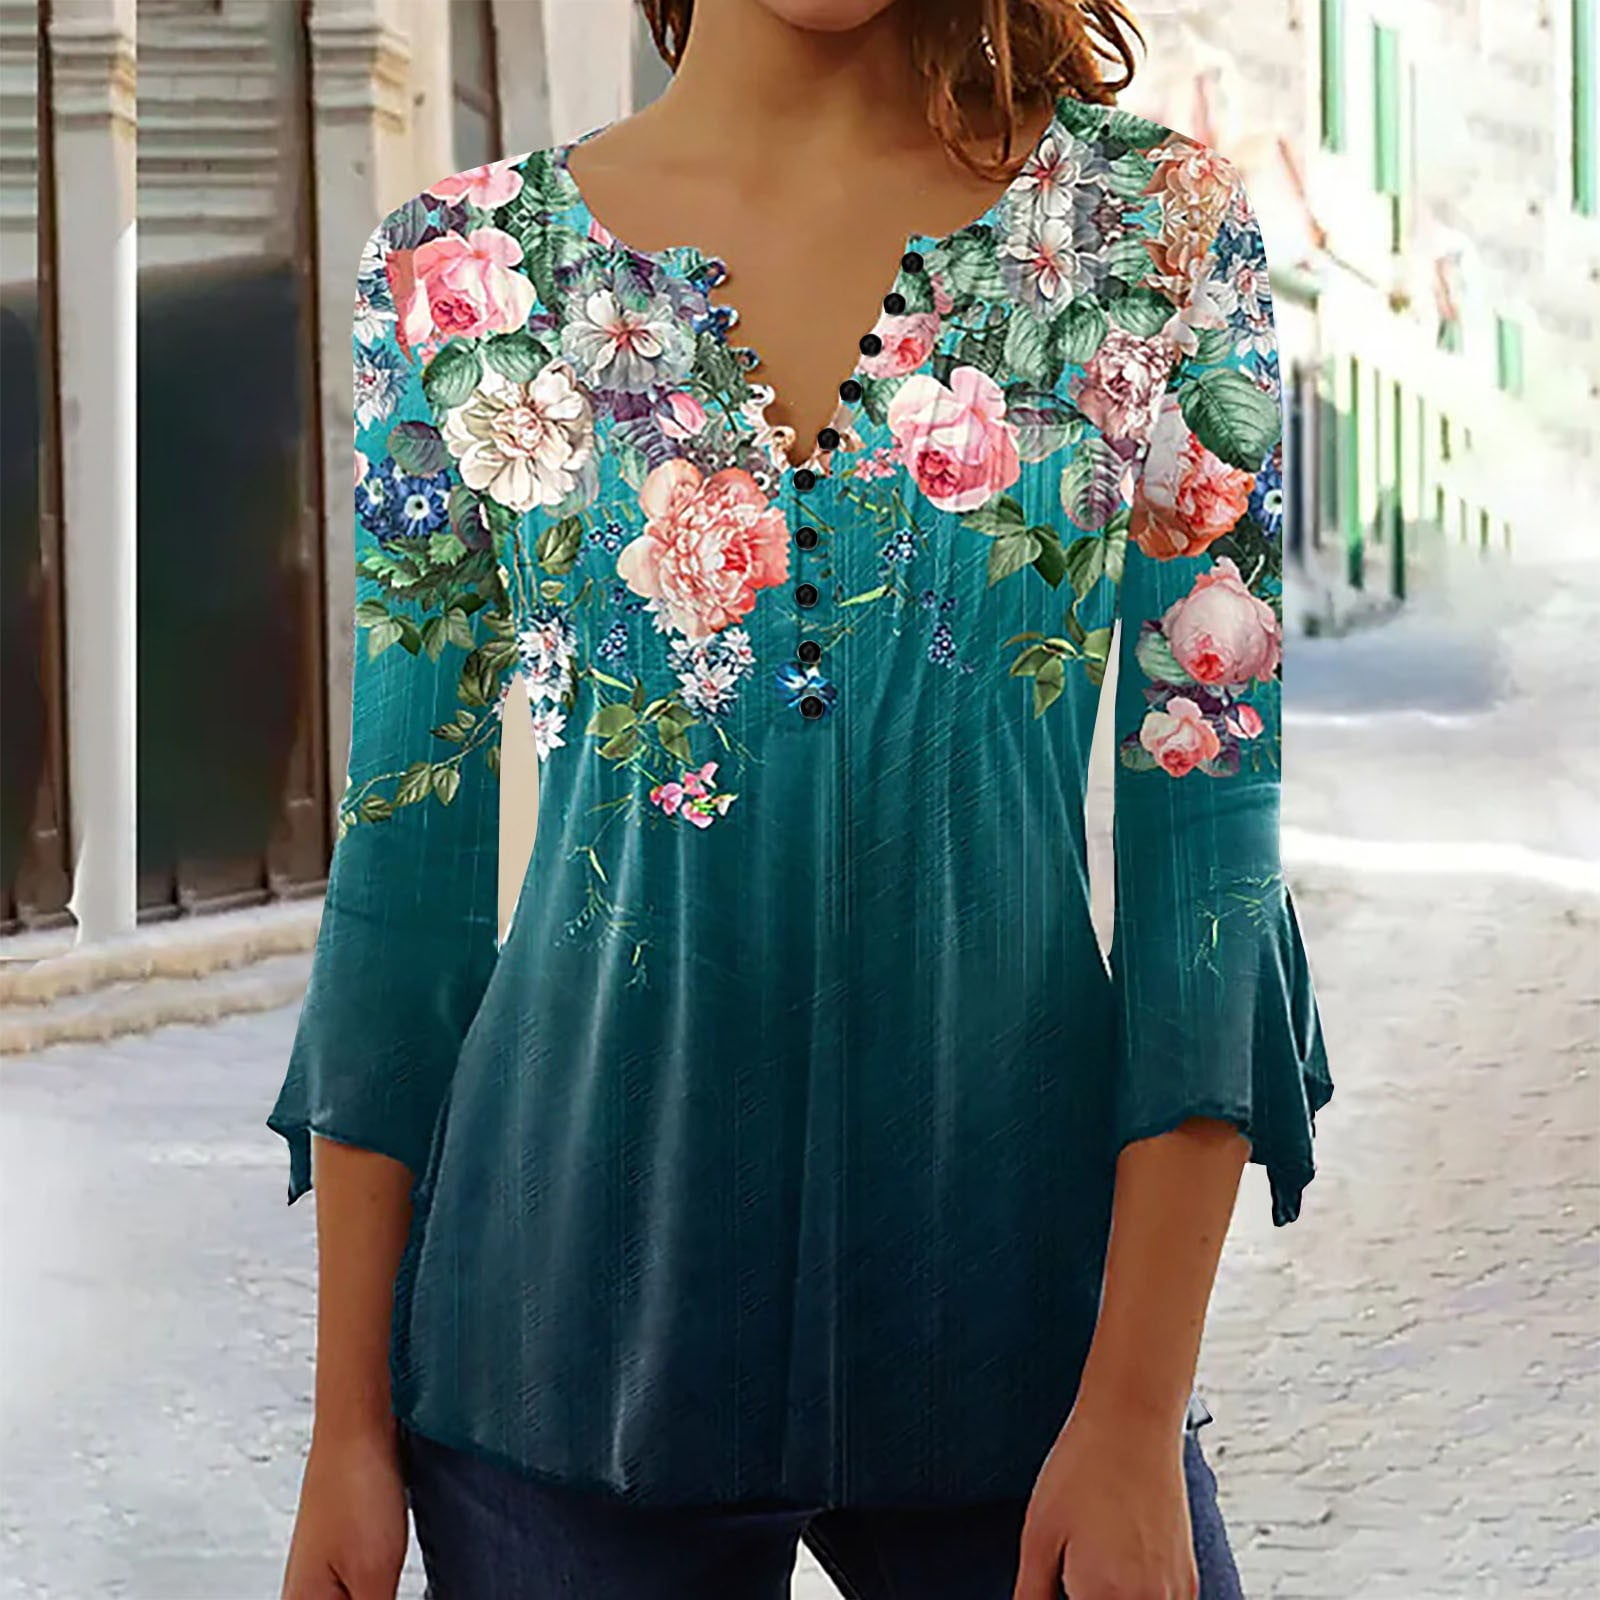 Womens Floral Tunic Tops 3/4 Sleeve V Neck Pleated Casual Tunic Blouse -  Multicolor White - C5185I230Z7